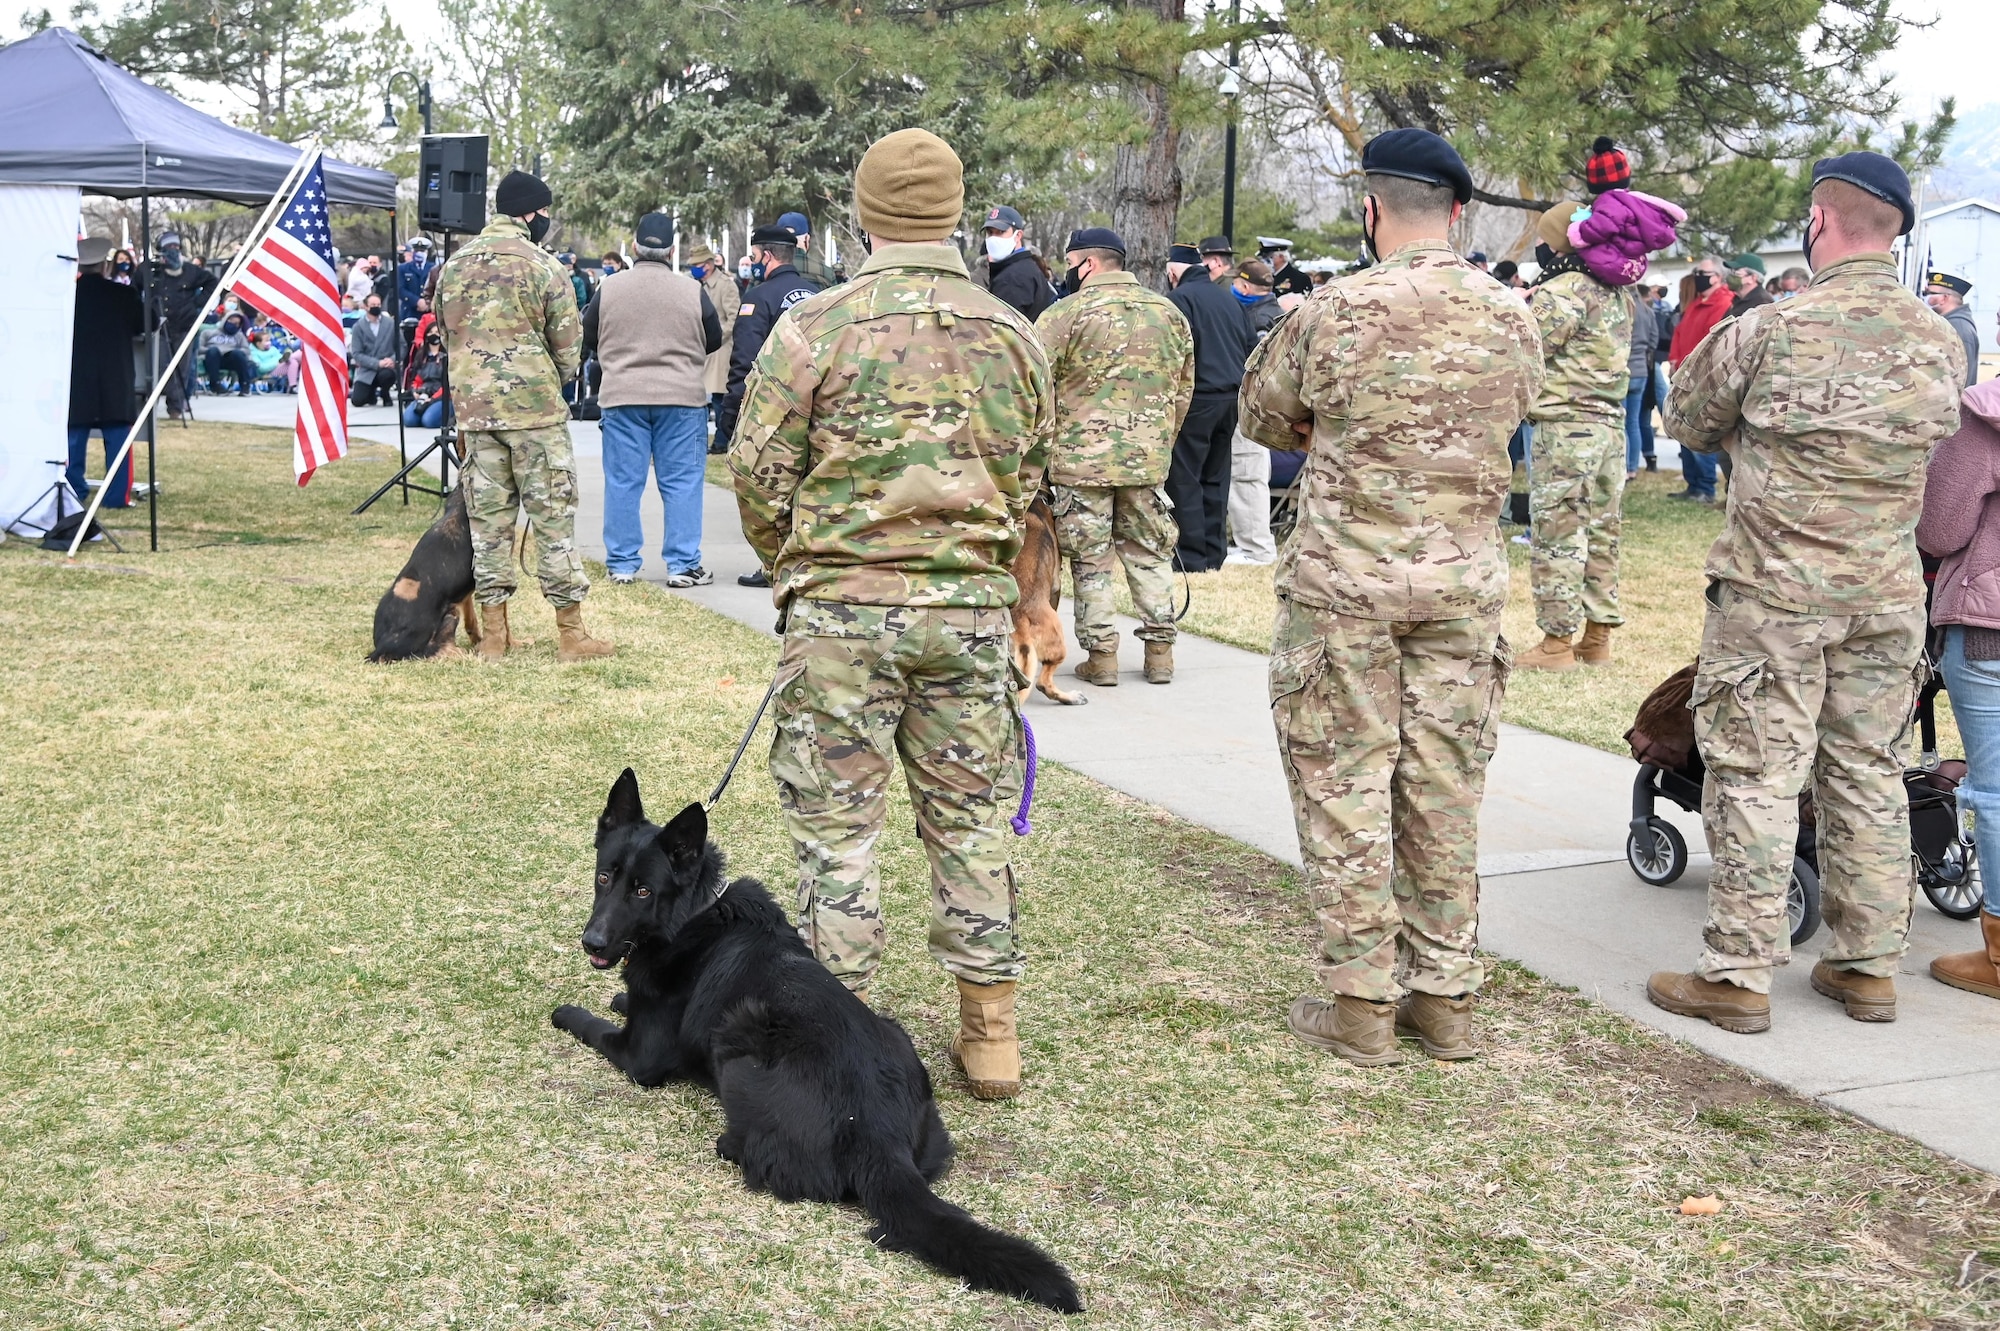 Handlers and their Military Working Dogs from 75th Security Forces Squadron at Hill Air Force Base, Utah, attend the Vietnam Veterans War Dog Memorial dedication ceremony Mar. 13, 2021, in Layton, Utah. The memorial features a monument honoring war dogs that served during a time when they were forgotten. (U.S. Air Force photo by Cynthia Griggs)